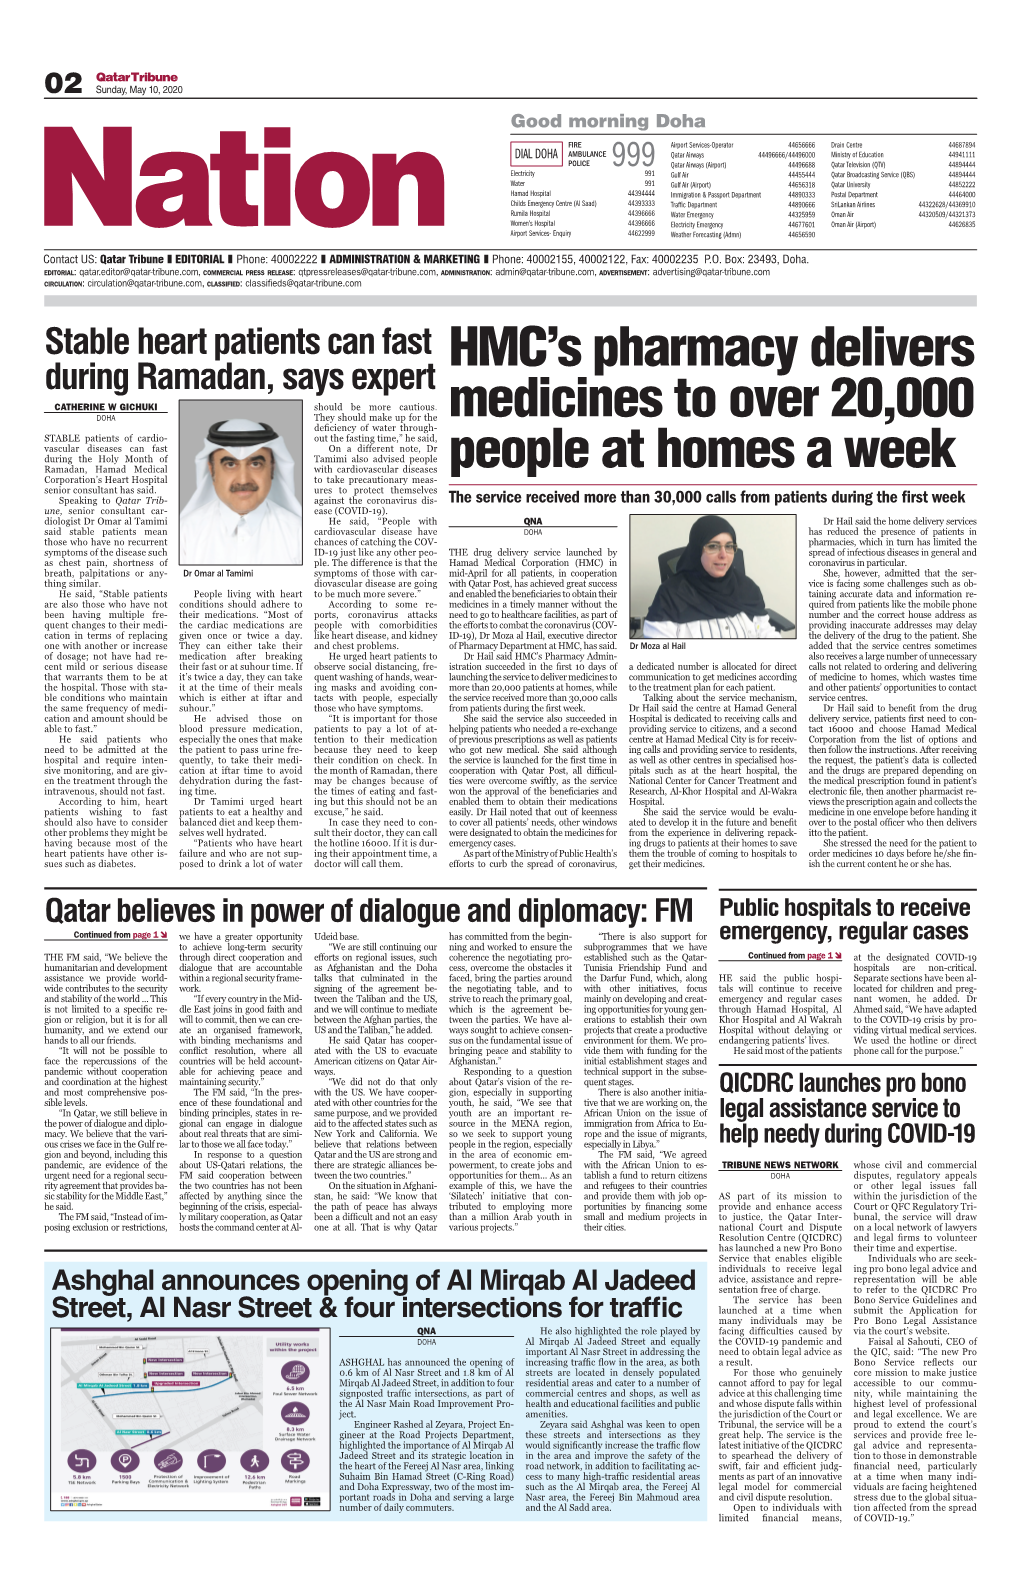 HMC's Pharmacy Delivers Medicines to Over 20,000 People at Homes a Week